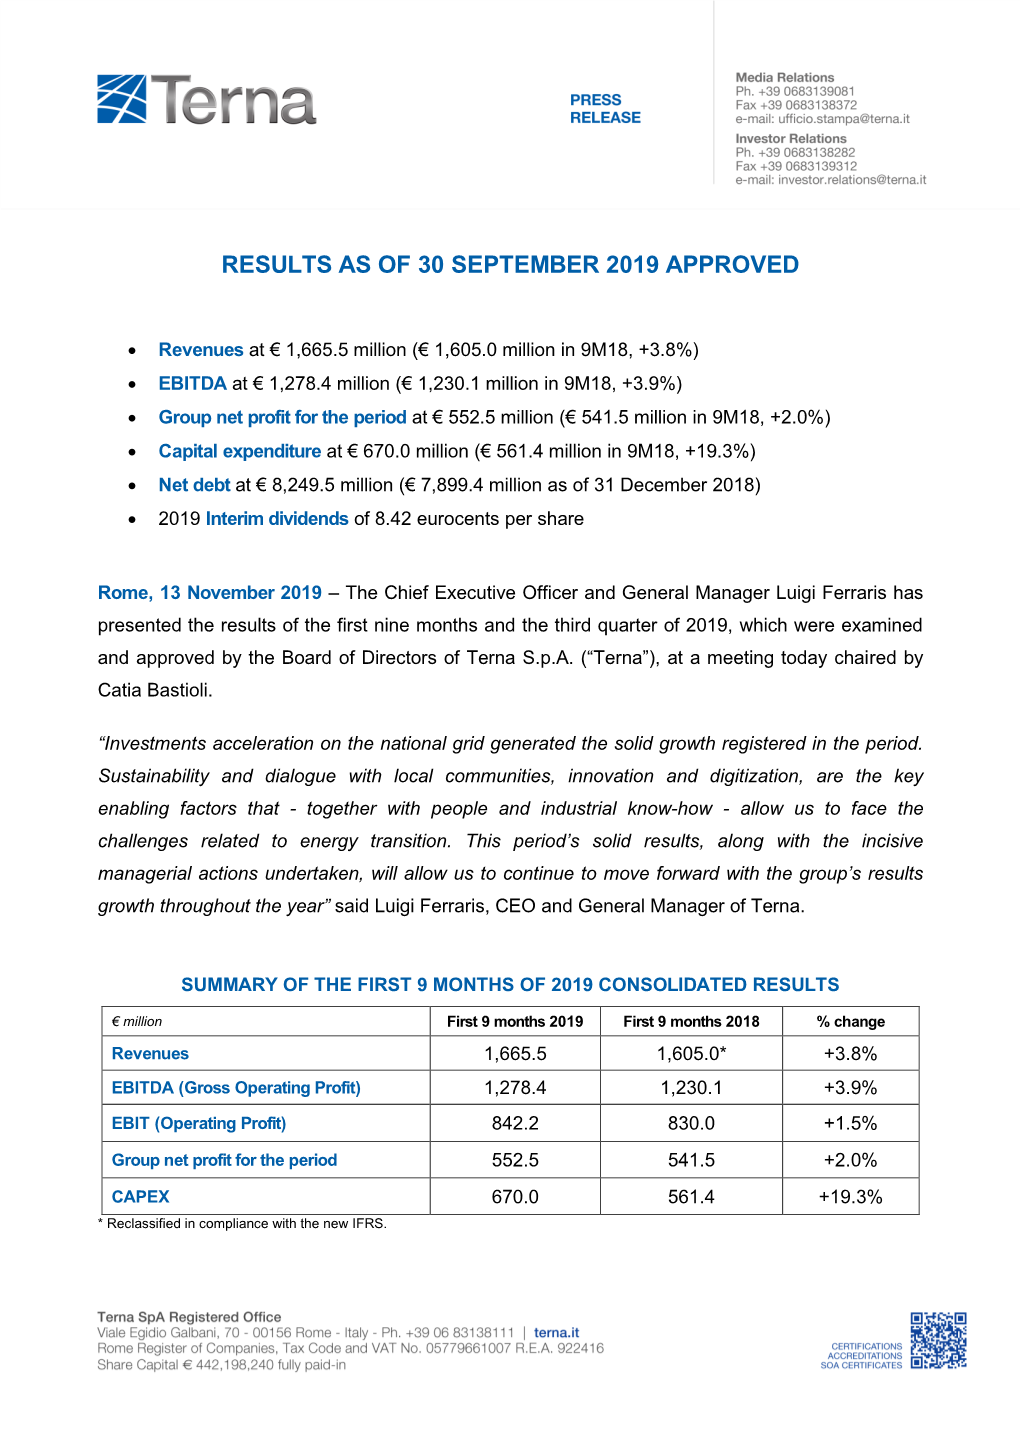 Results As of 30 September 2019 Approved